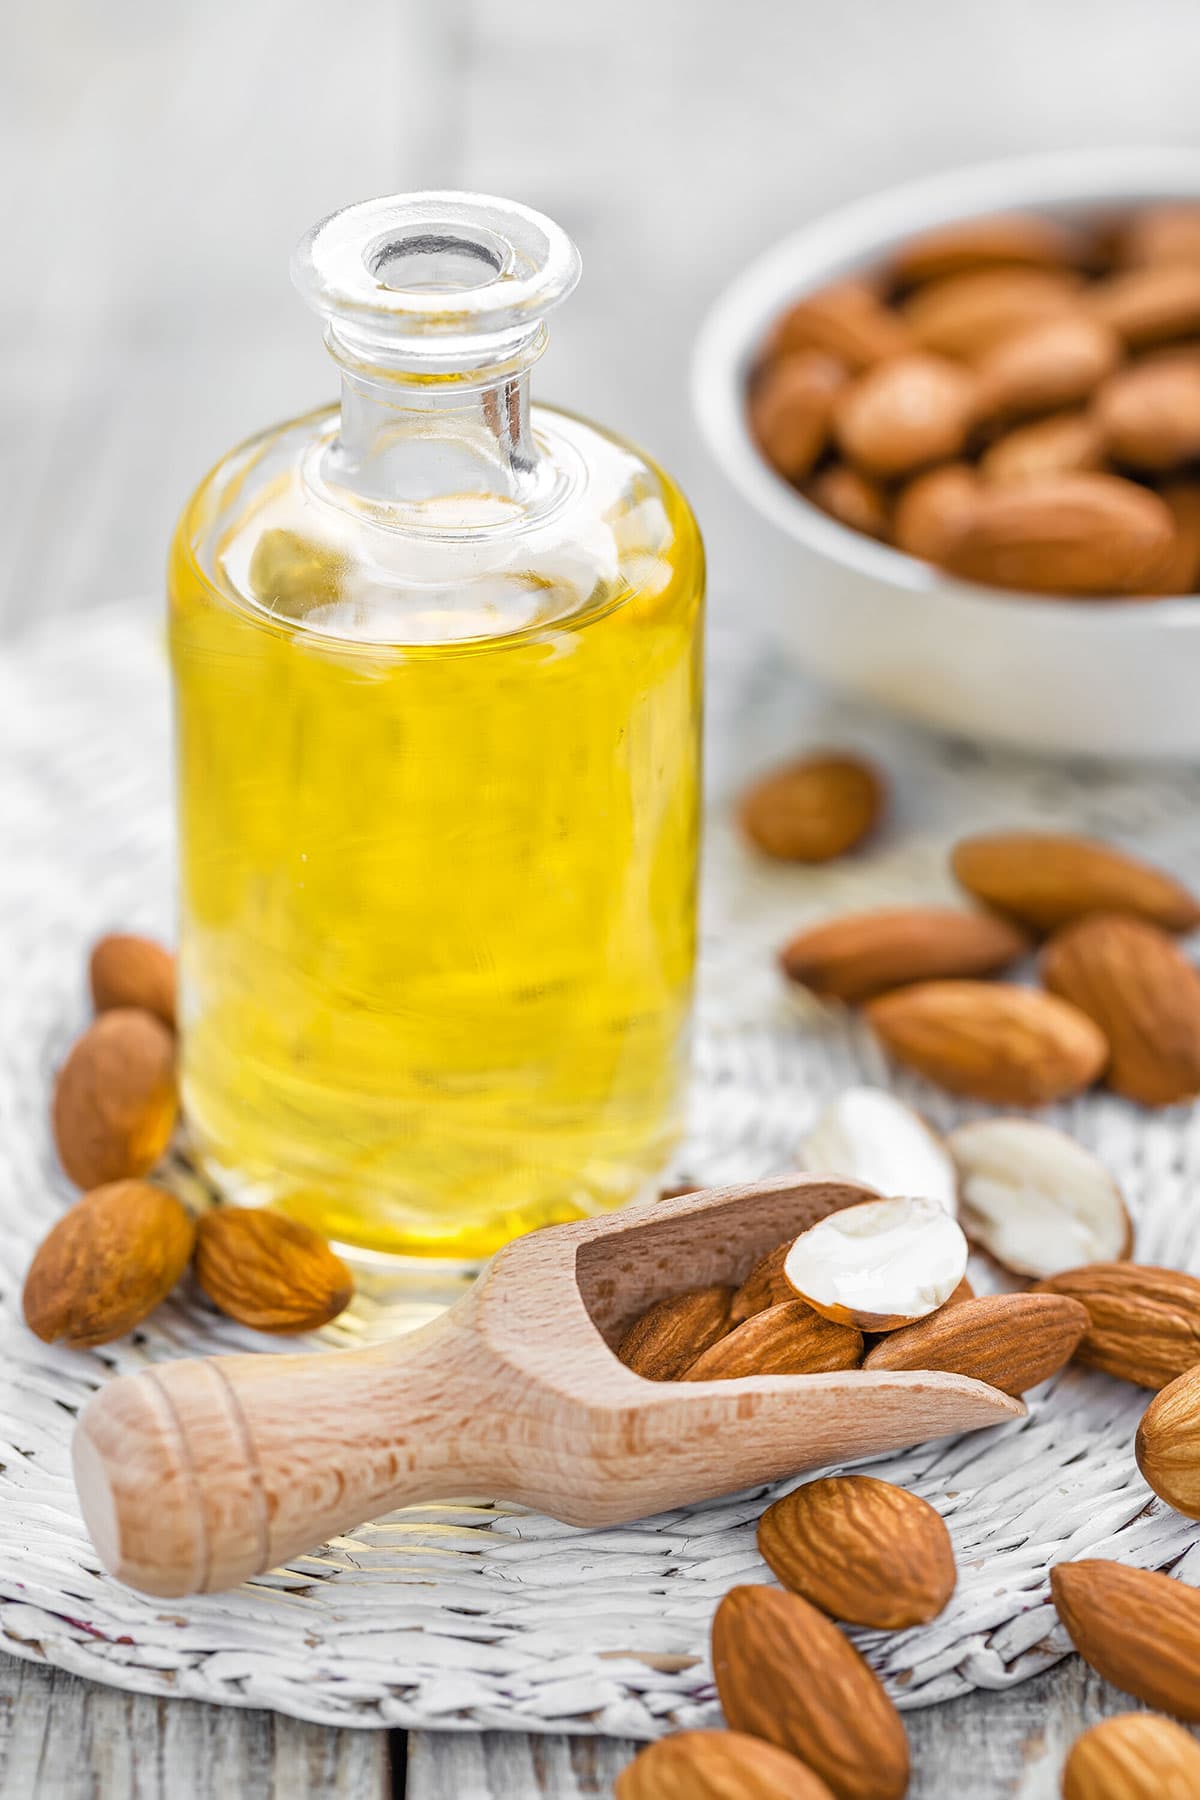 8 Benefits of Almond Oil for Face